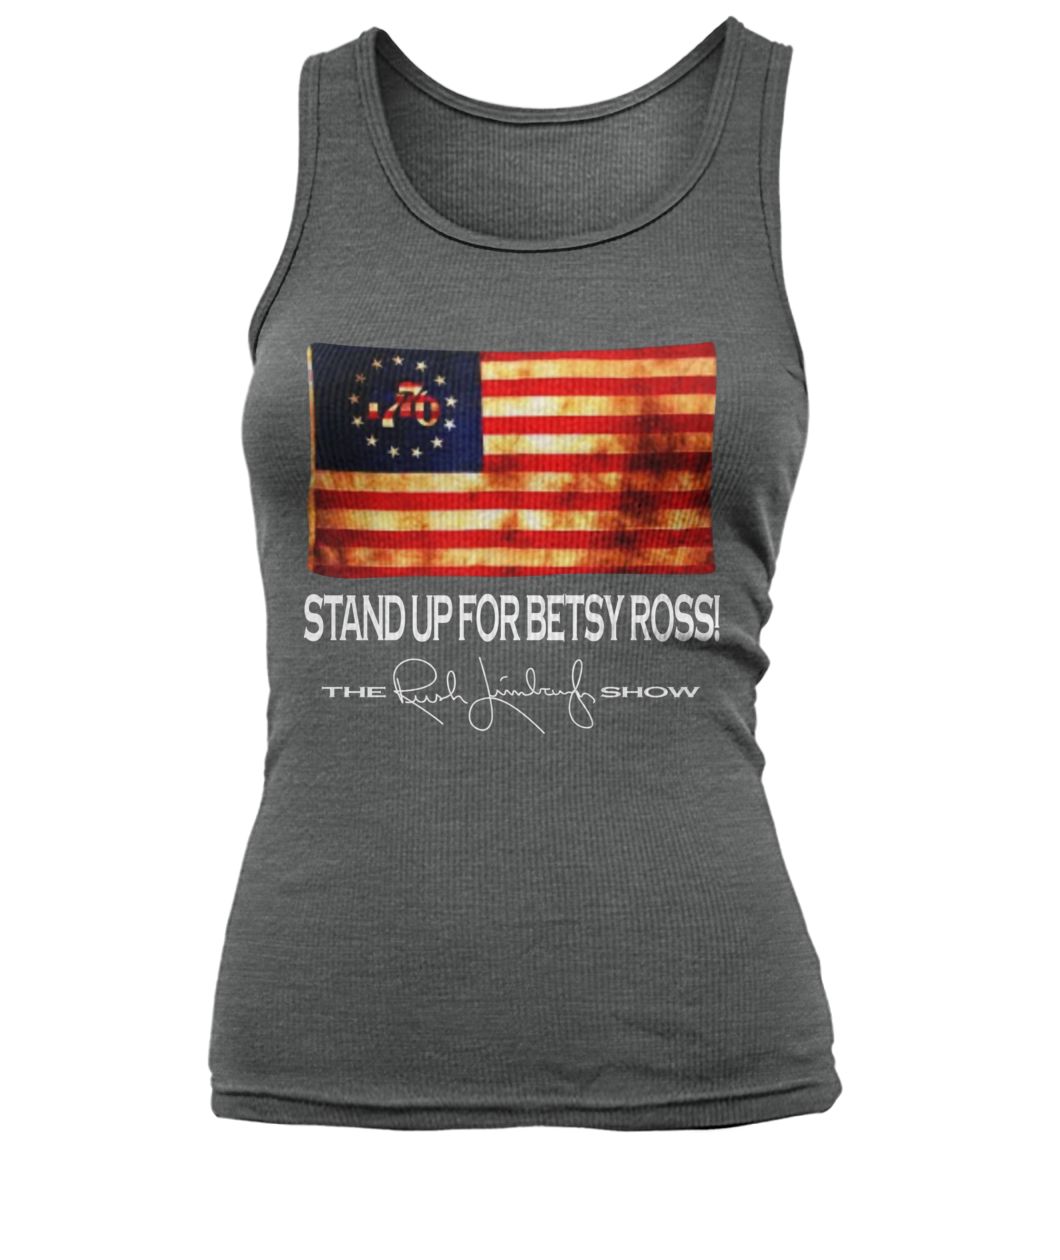 Stand up for betsy ross 1776 american flag women's tank top